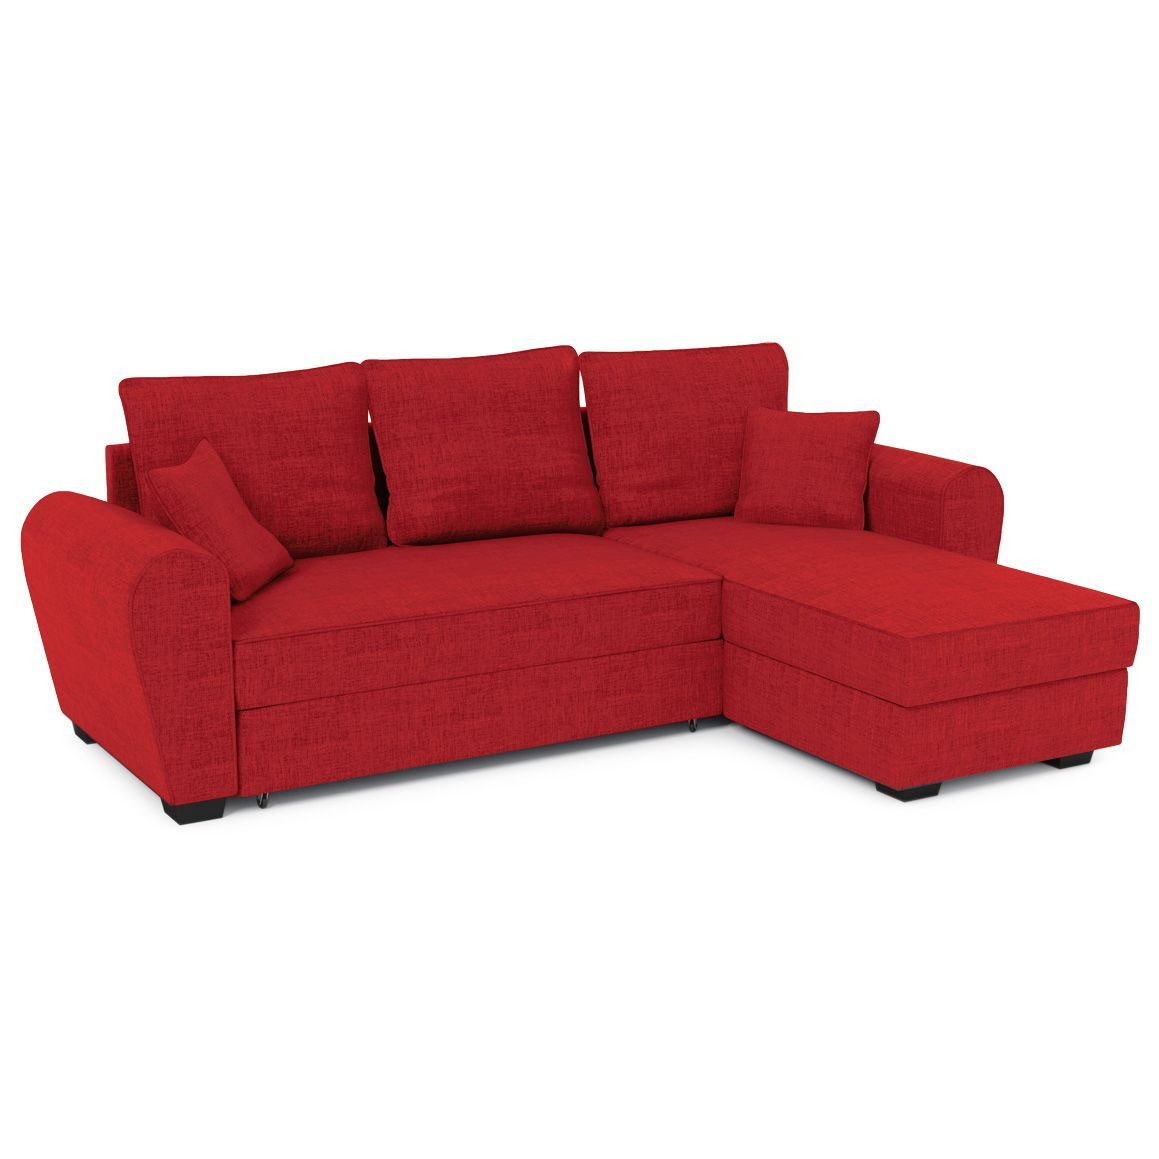 Nicea Corner Sofa Bed With Storage, red - image 1